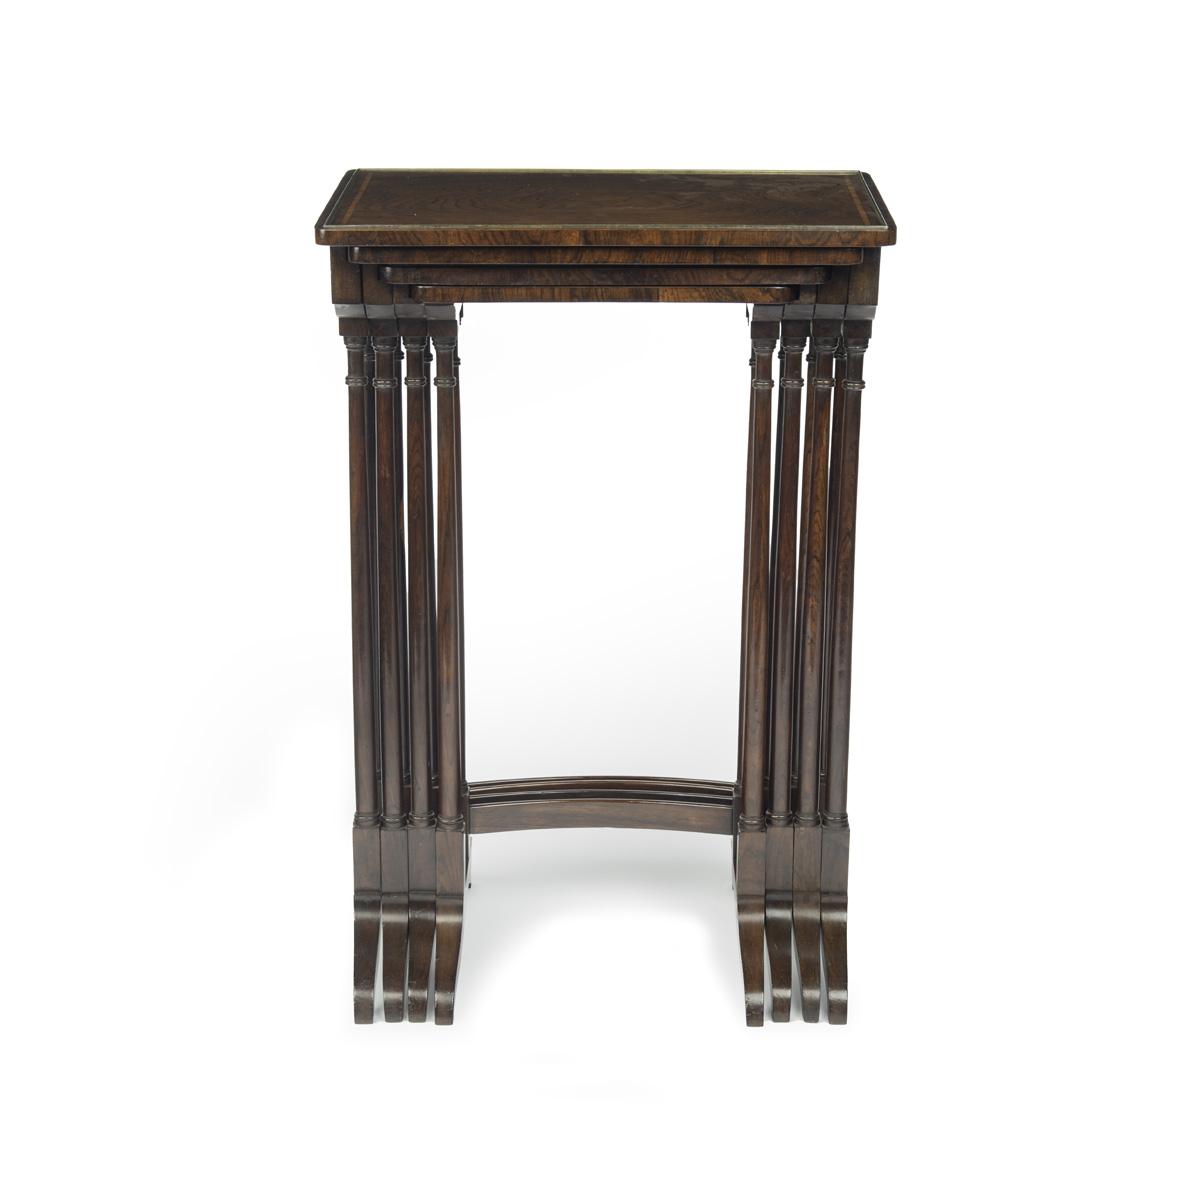 Regency rosewood Quartetto tables, attributed to Gillows